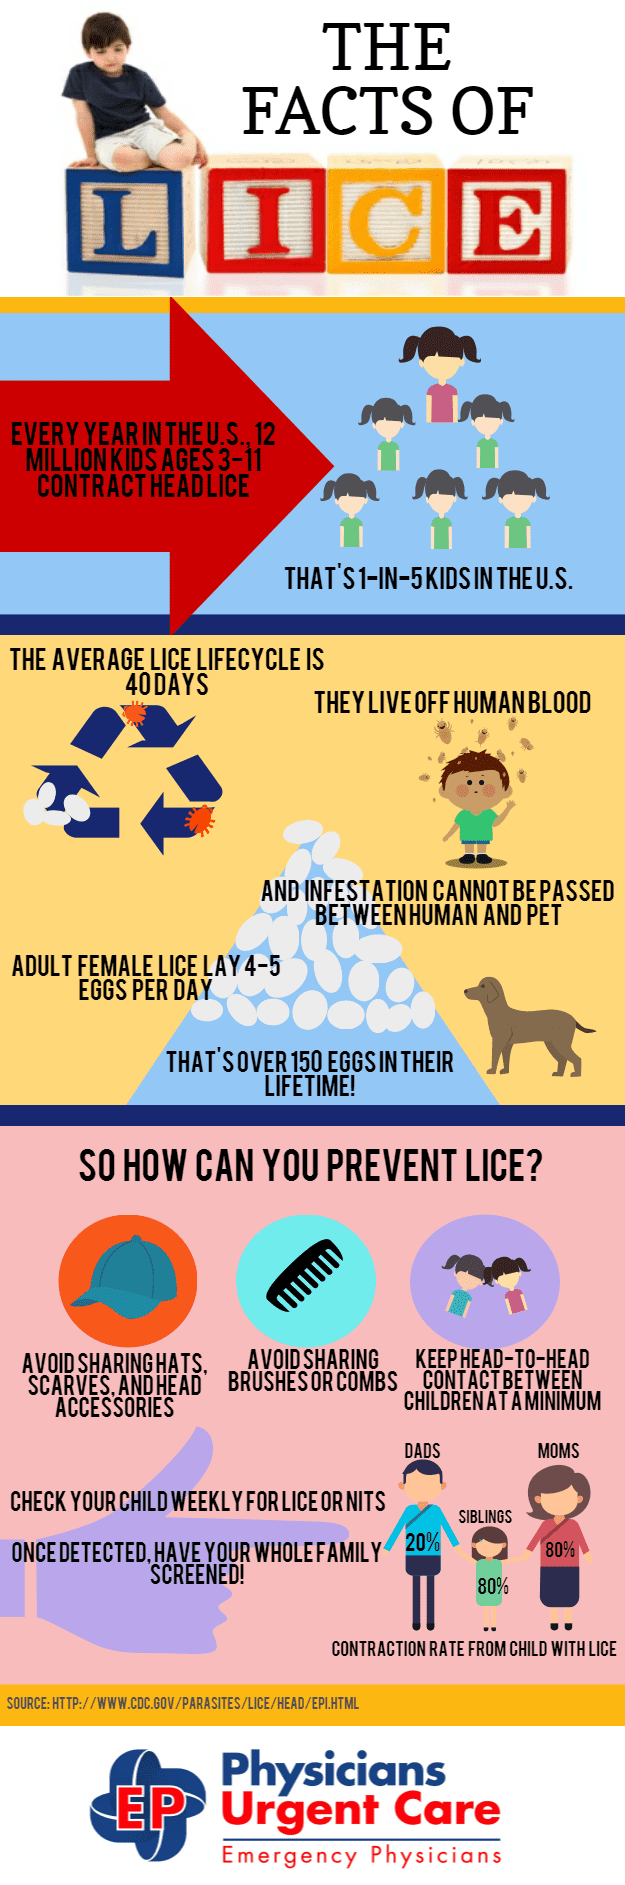 national-head-lice-prevention-month-puc